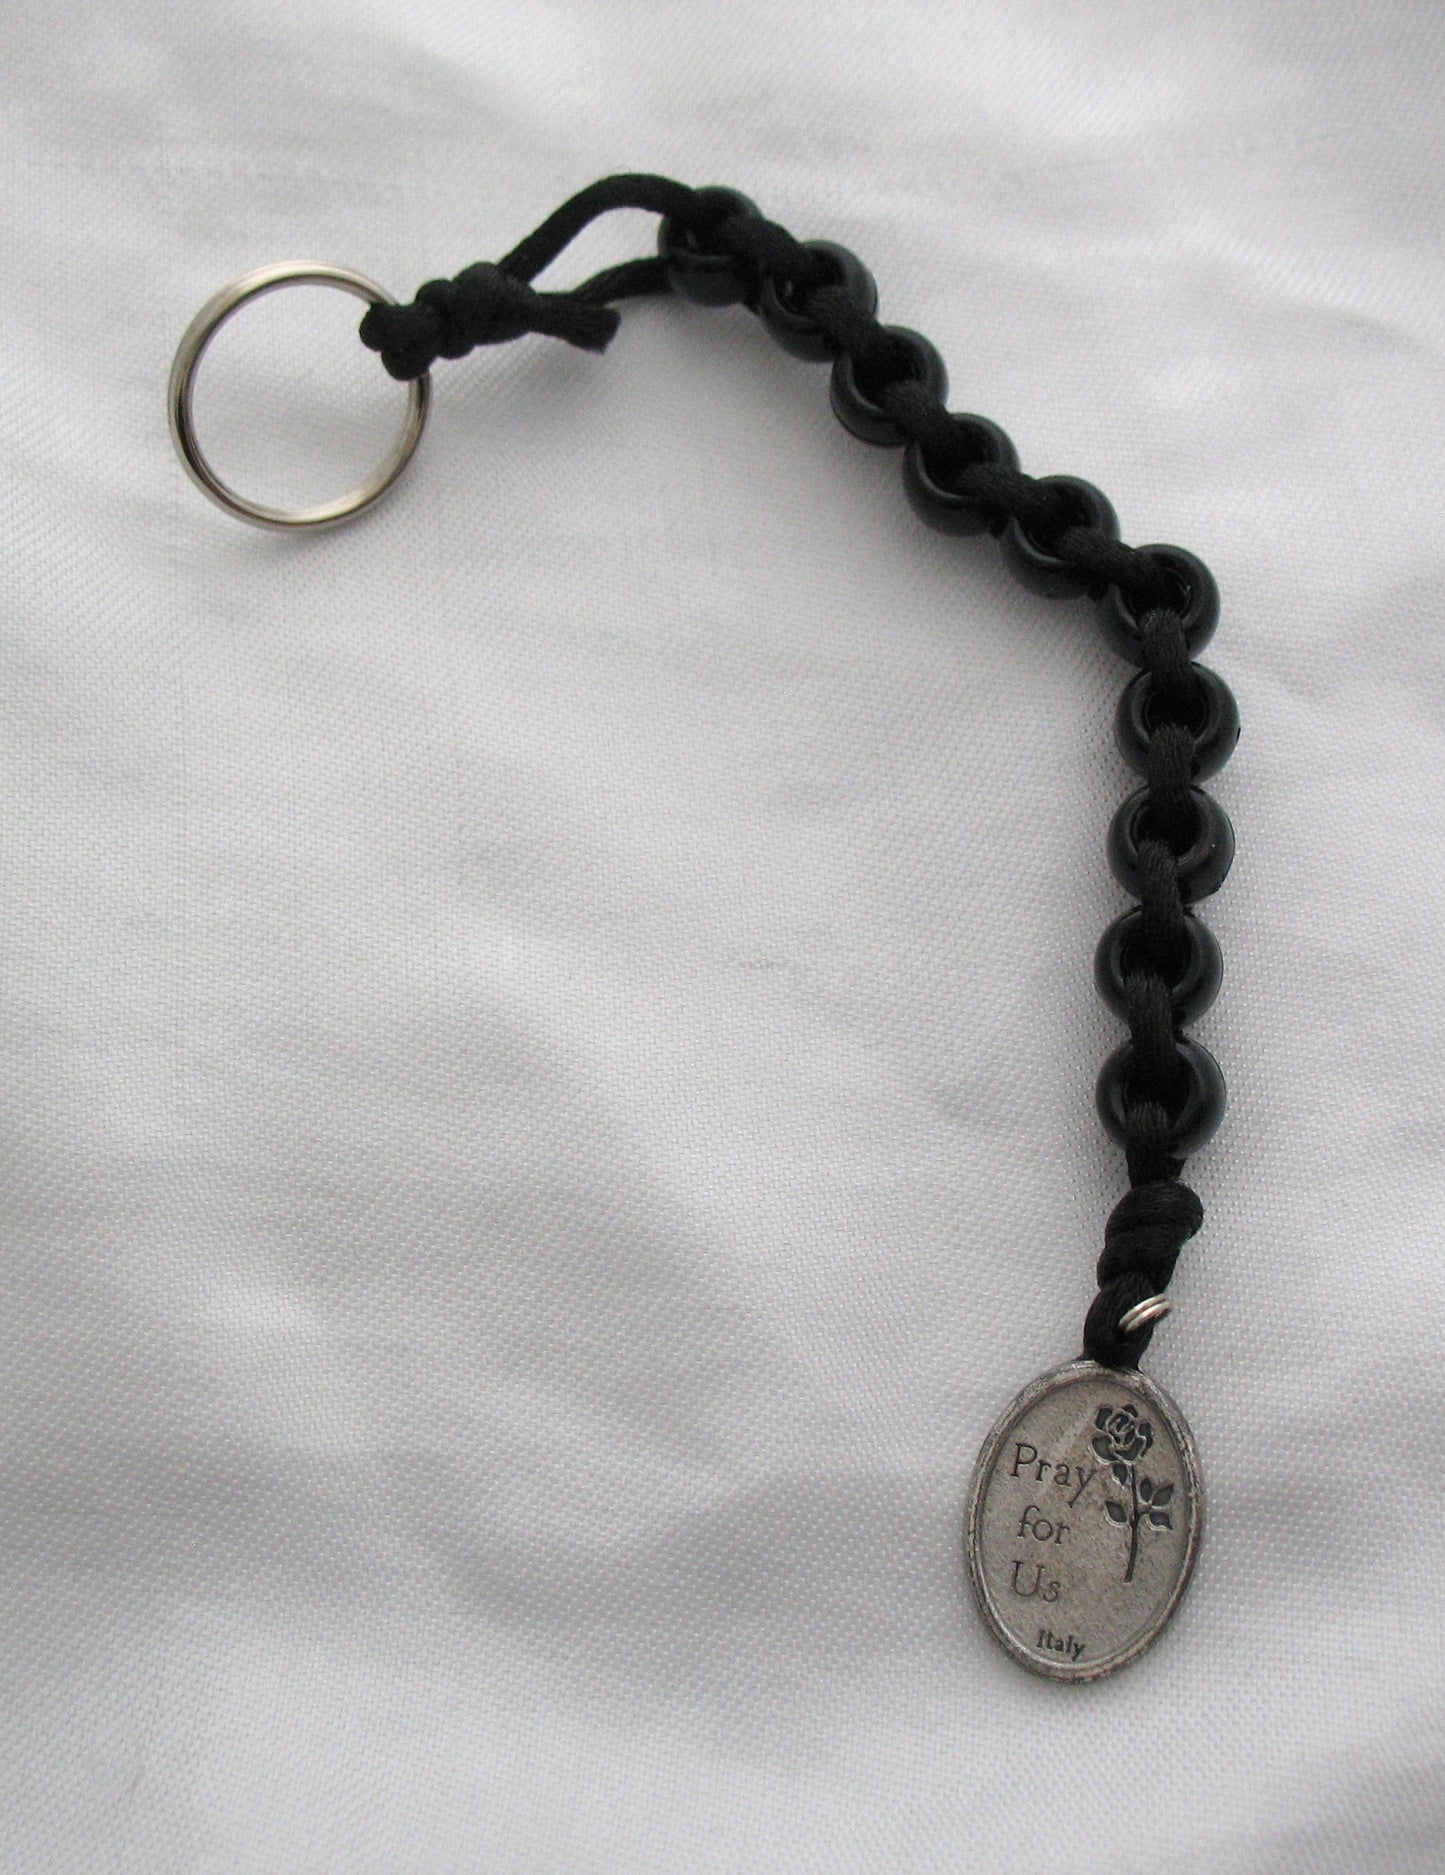 Chaplet - St. Therese Sacrifice Beads